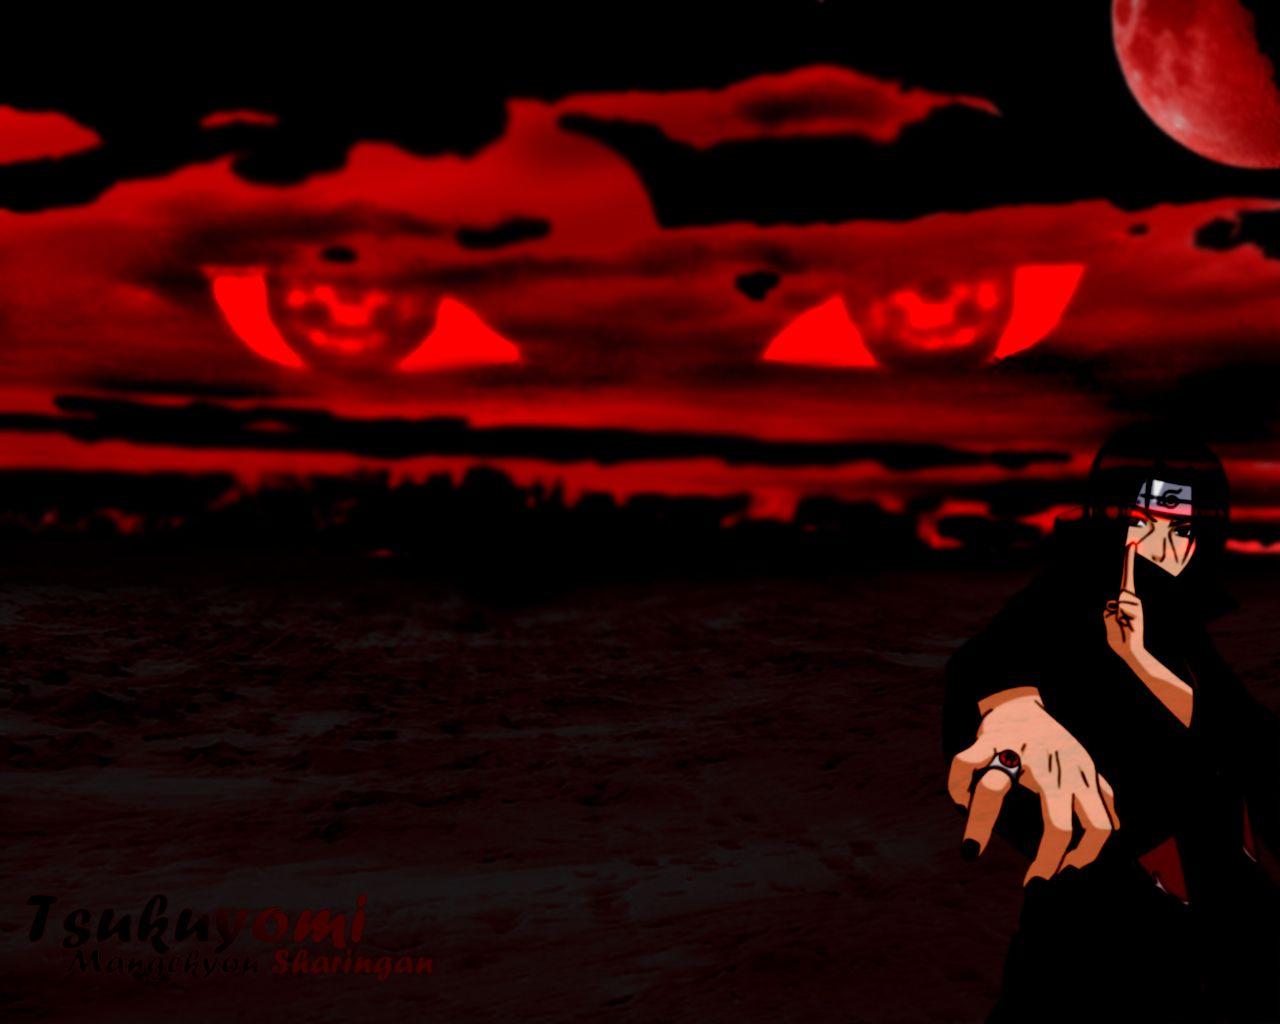 In The Name Of The Rose Itachi By Itachi Of Akatsuki